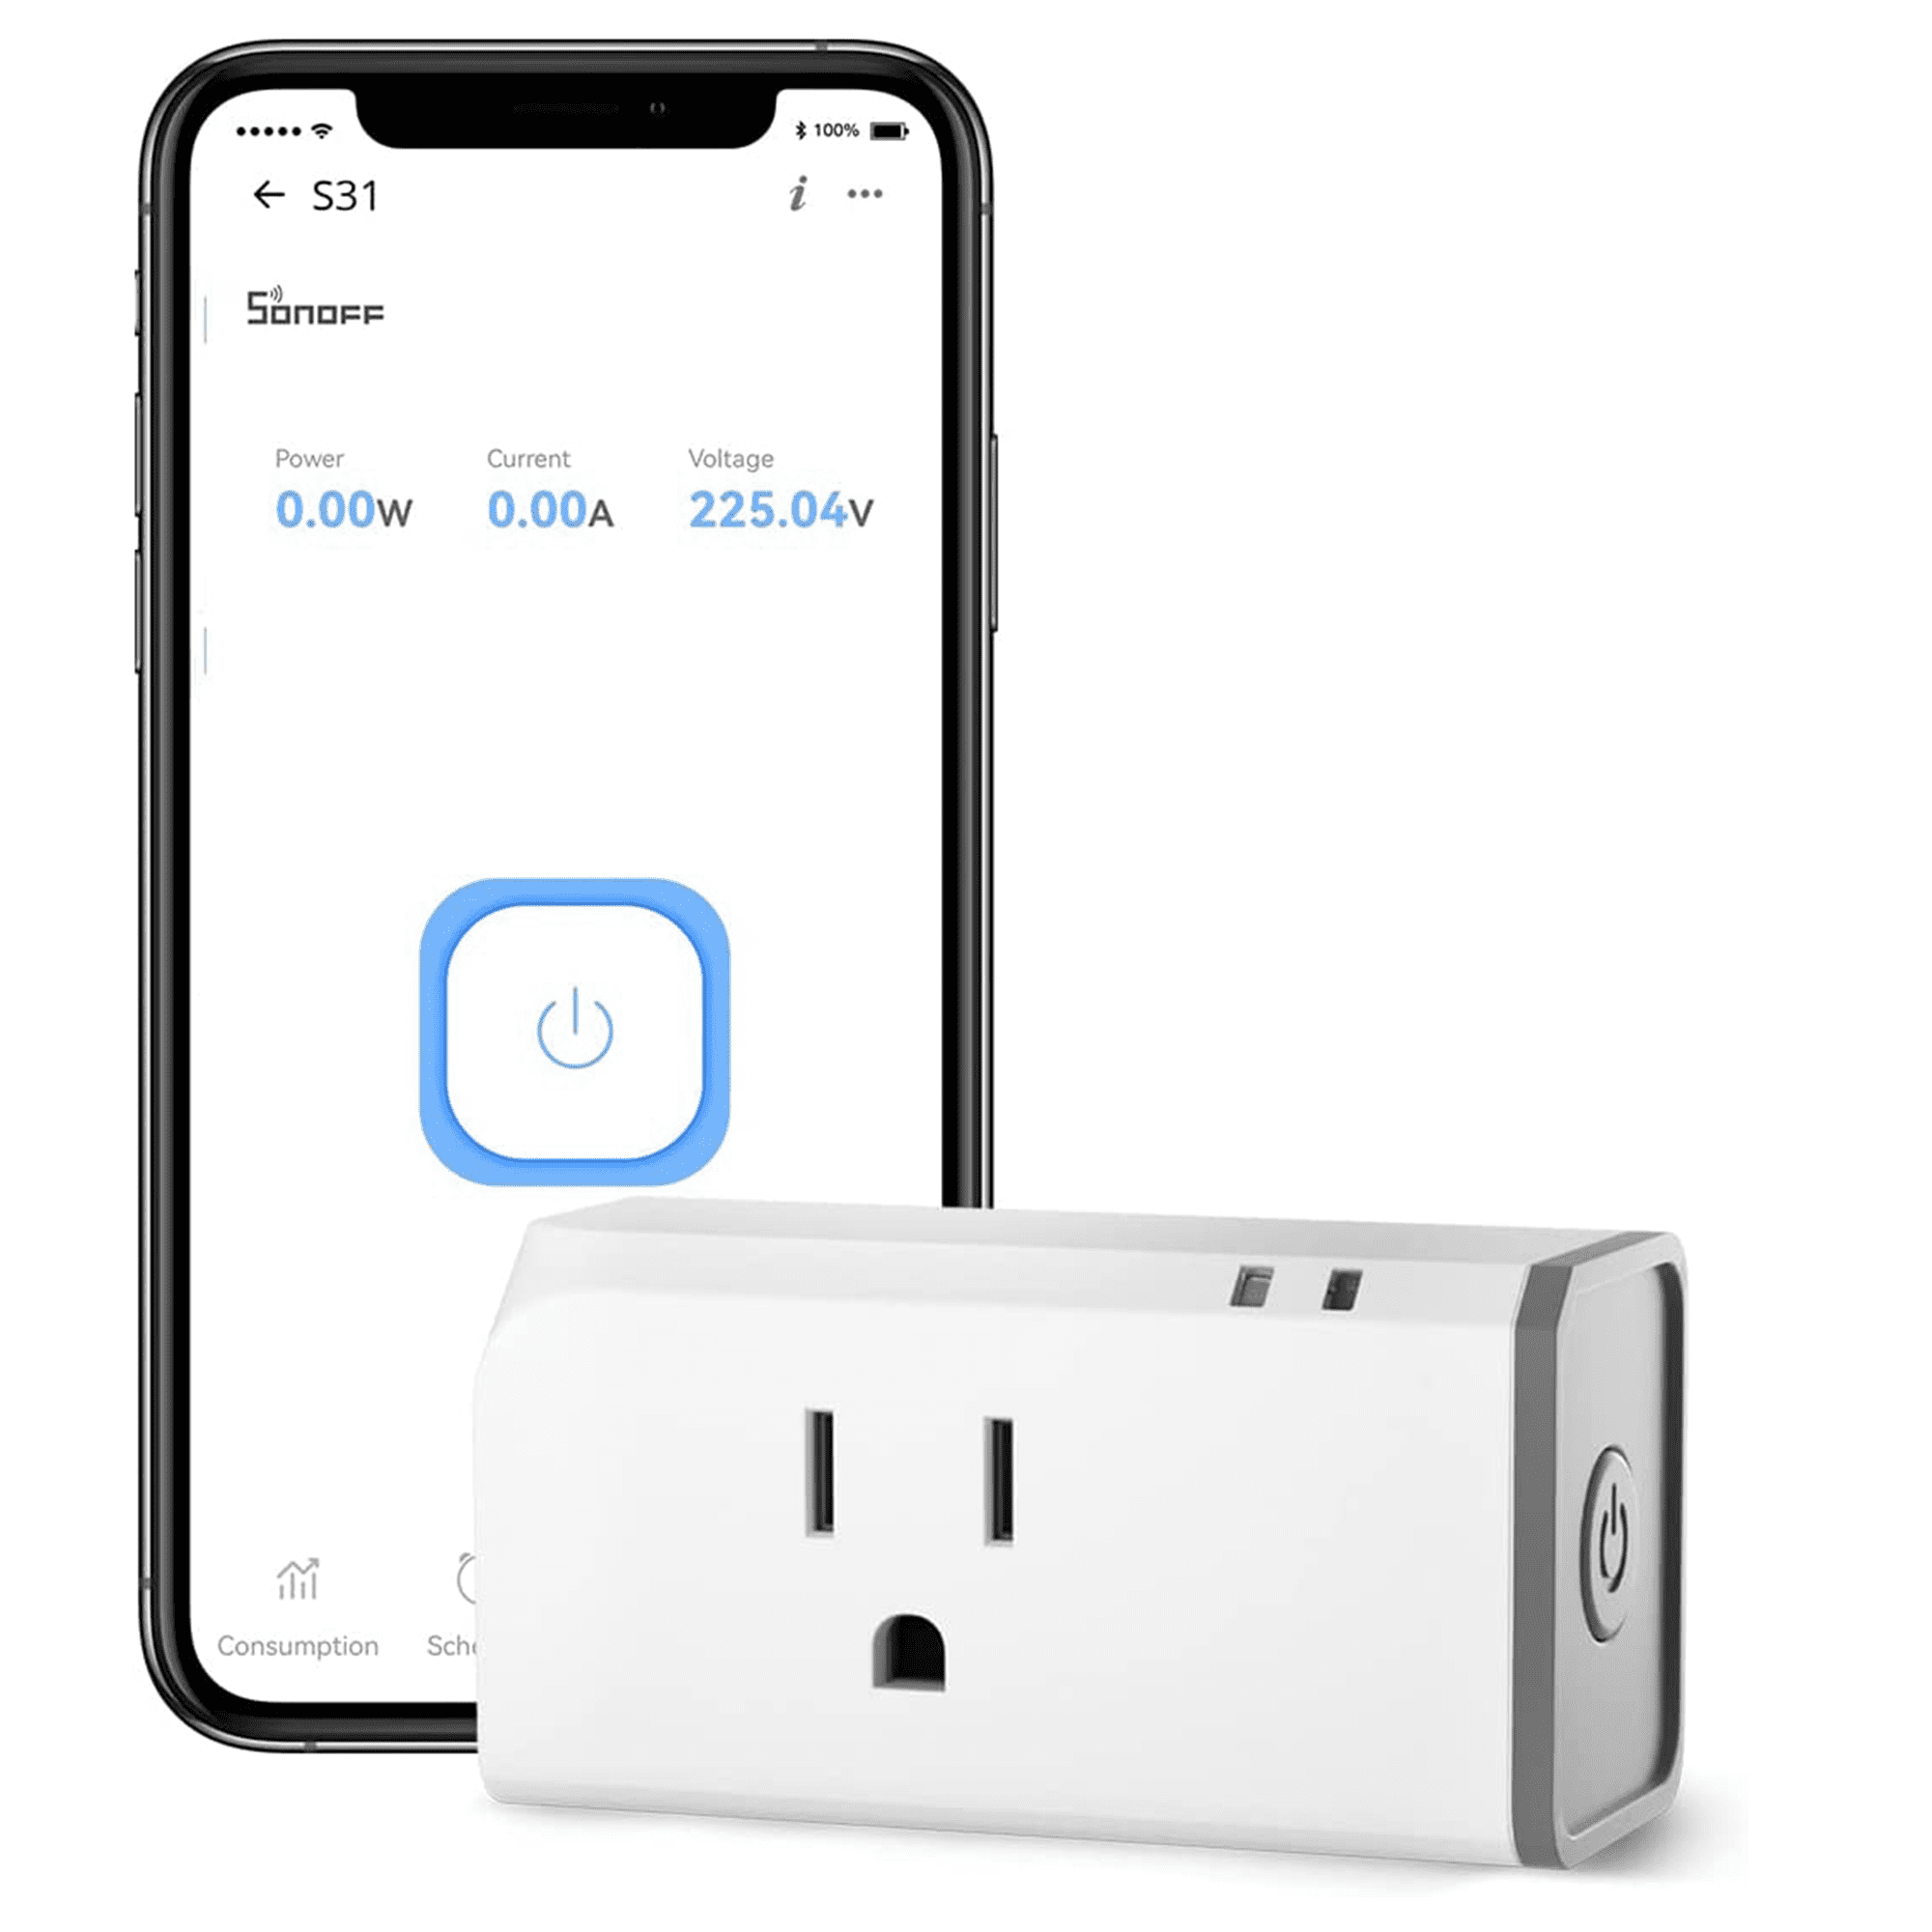 Viewise SH-WPM11 Wi-Fi Mini Smart Plug Works with Alexa for Voice Control  Save Energy and Reduce Electric Bill